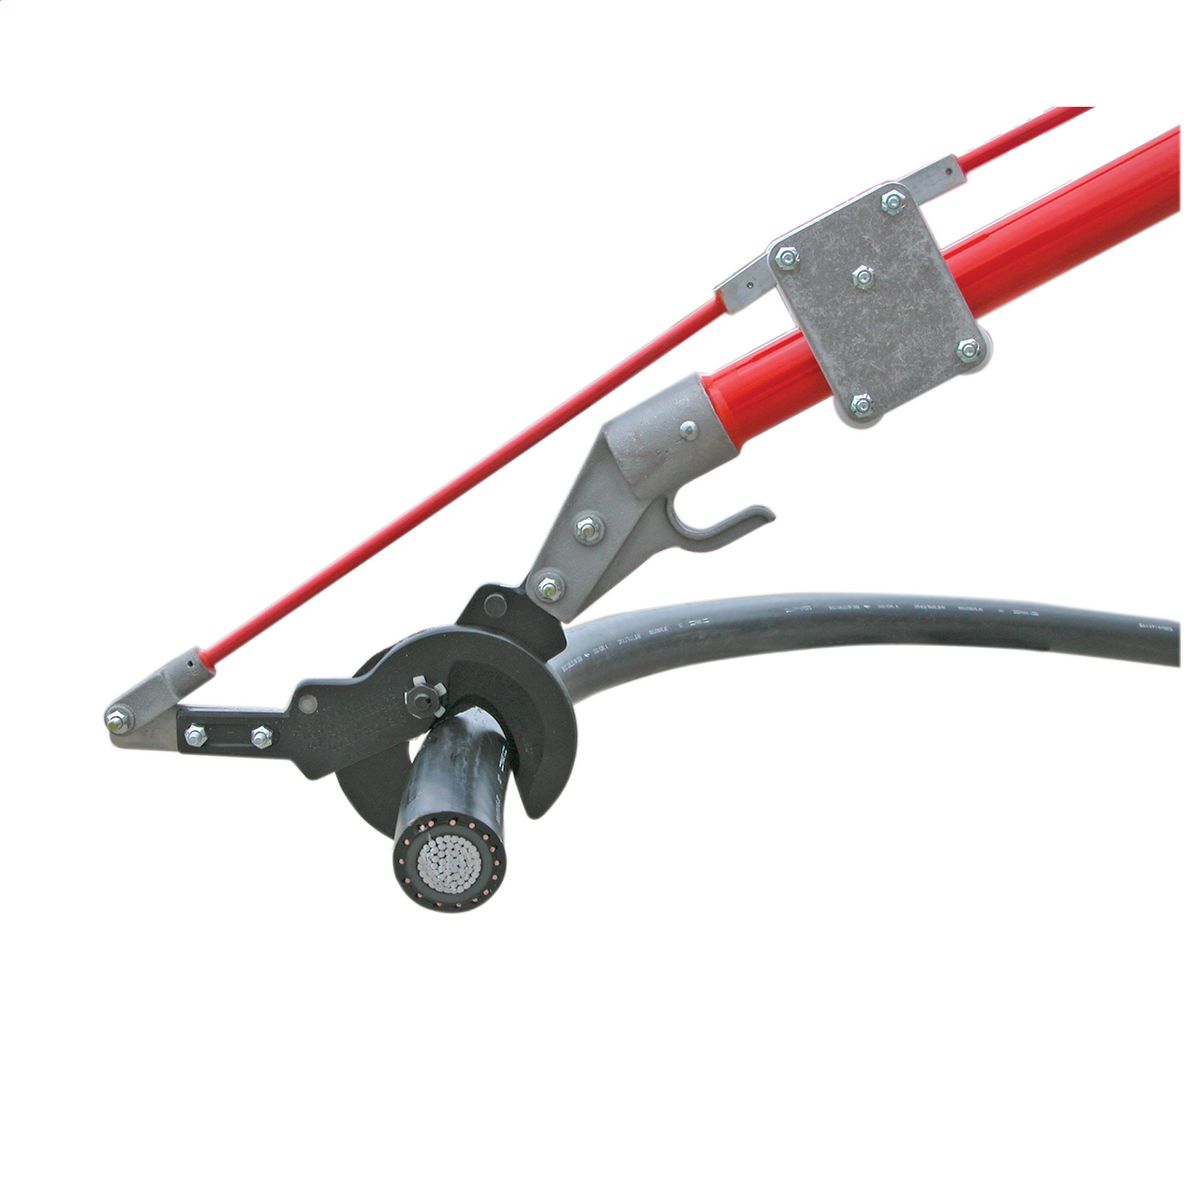 InneToc Aluminum Copper Ratchet Cable Cutters,Wire Cutters for